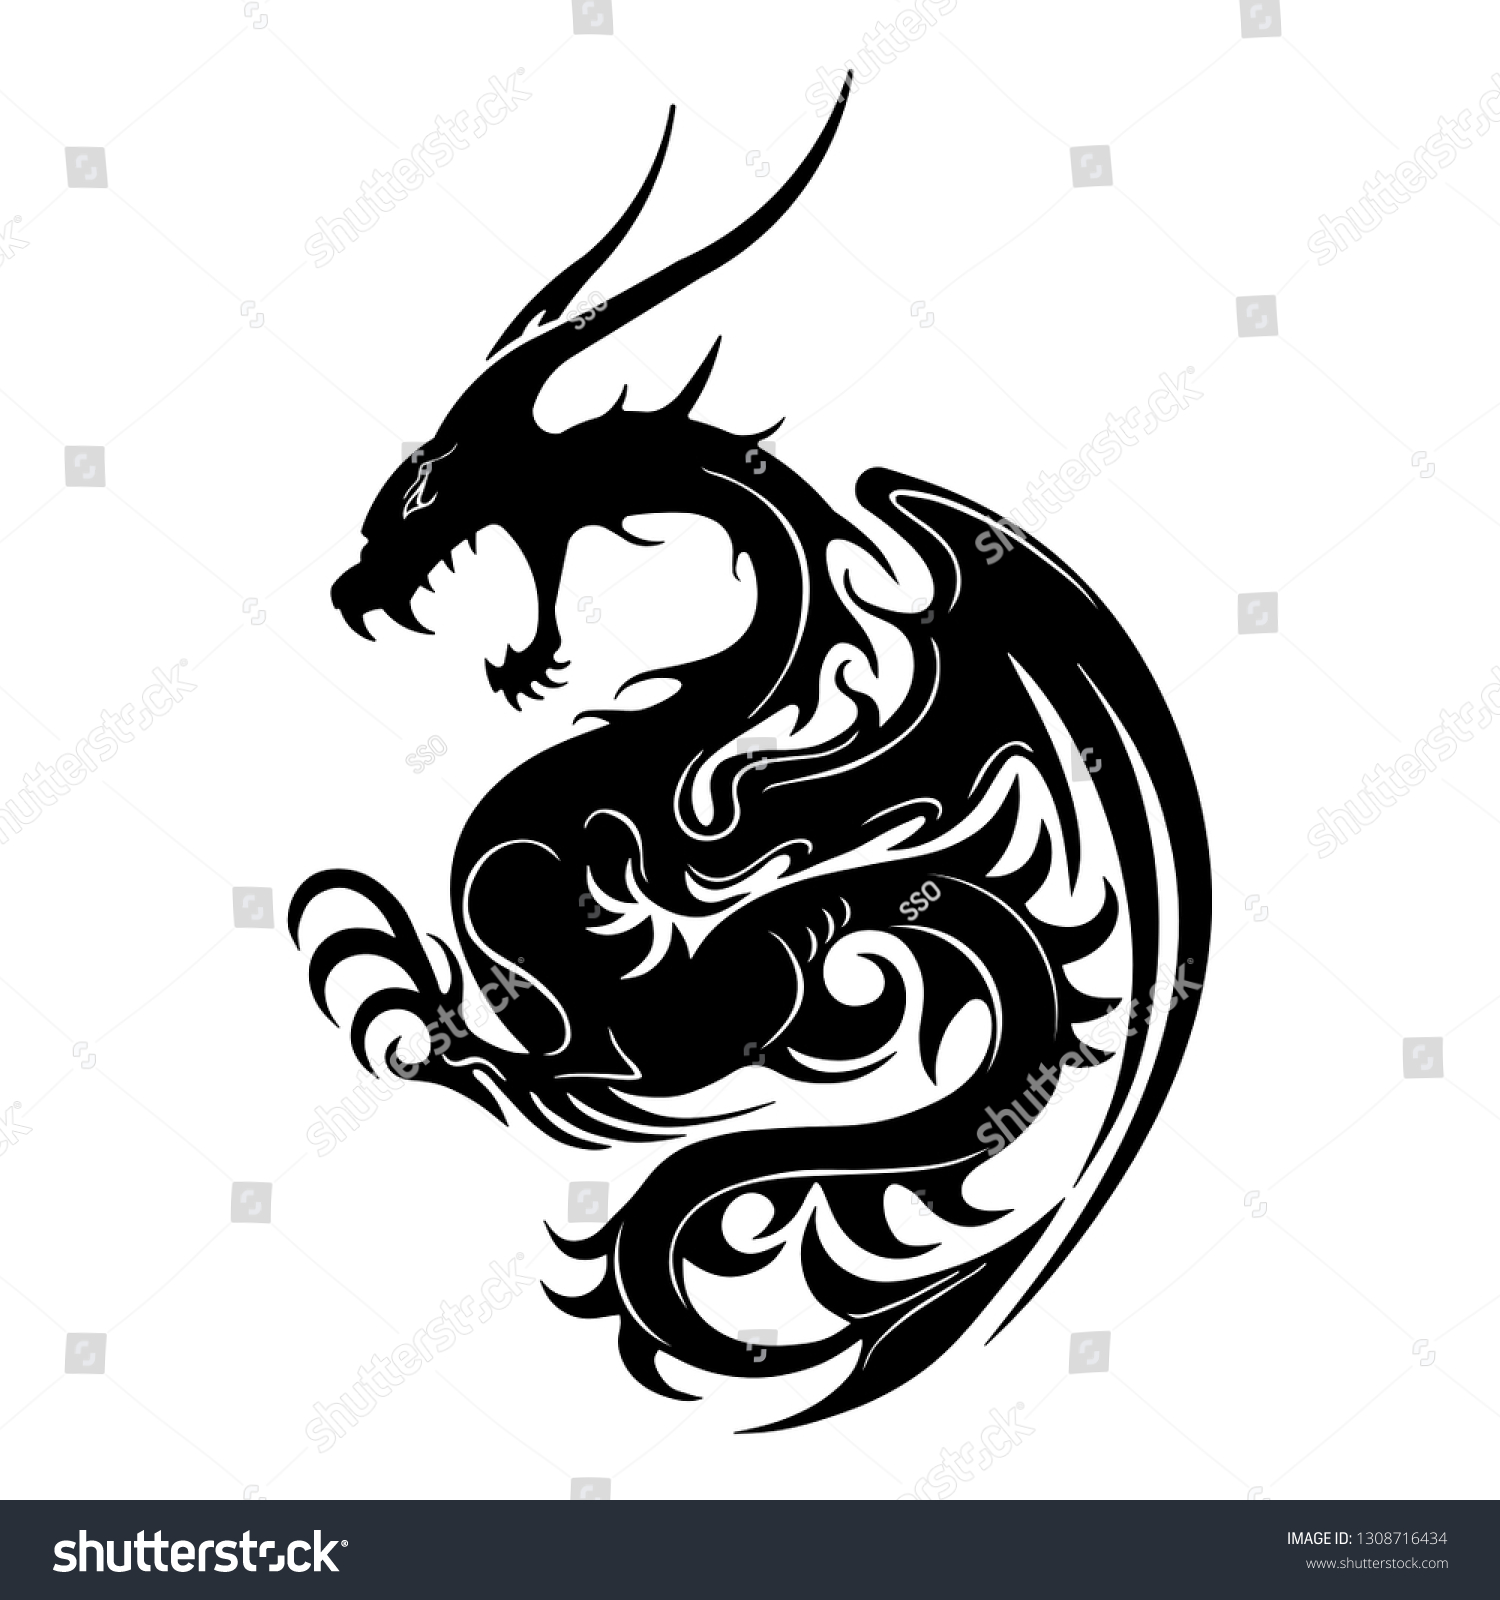 Black Dragon Silhouette Image On White Stock Vector (Royalty Free ...